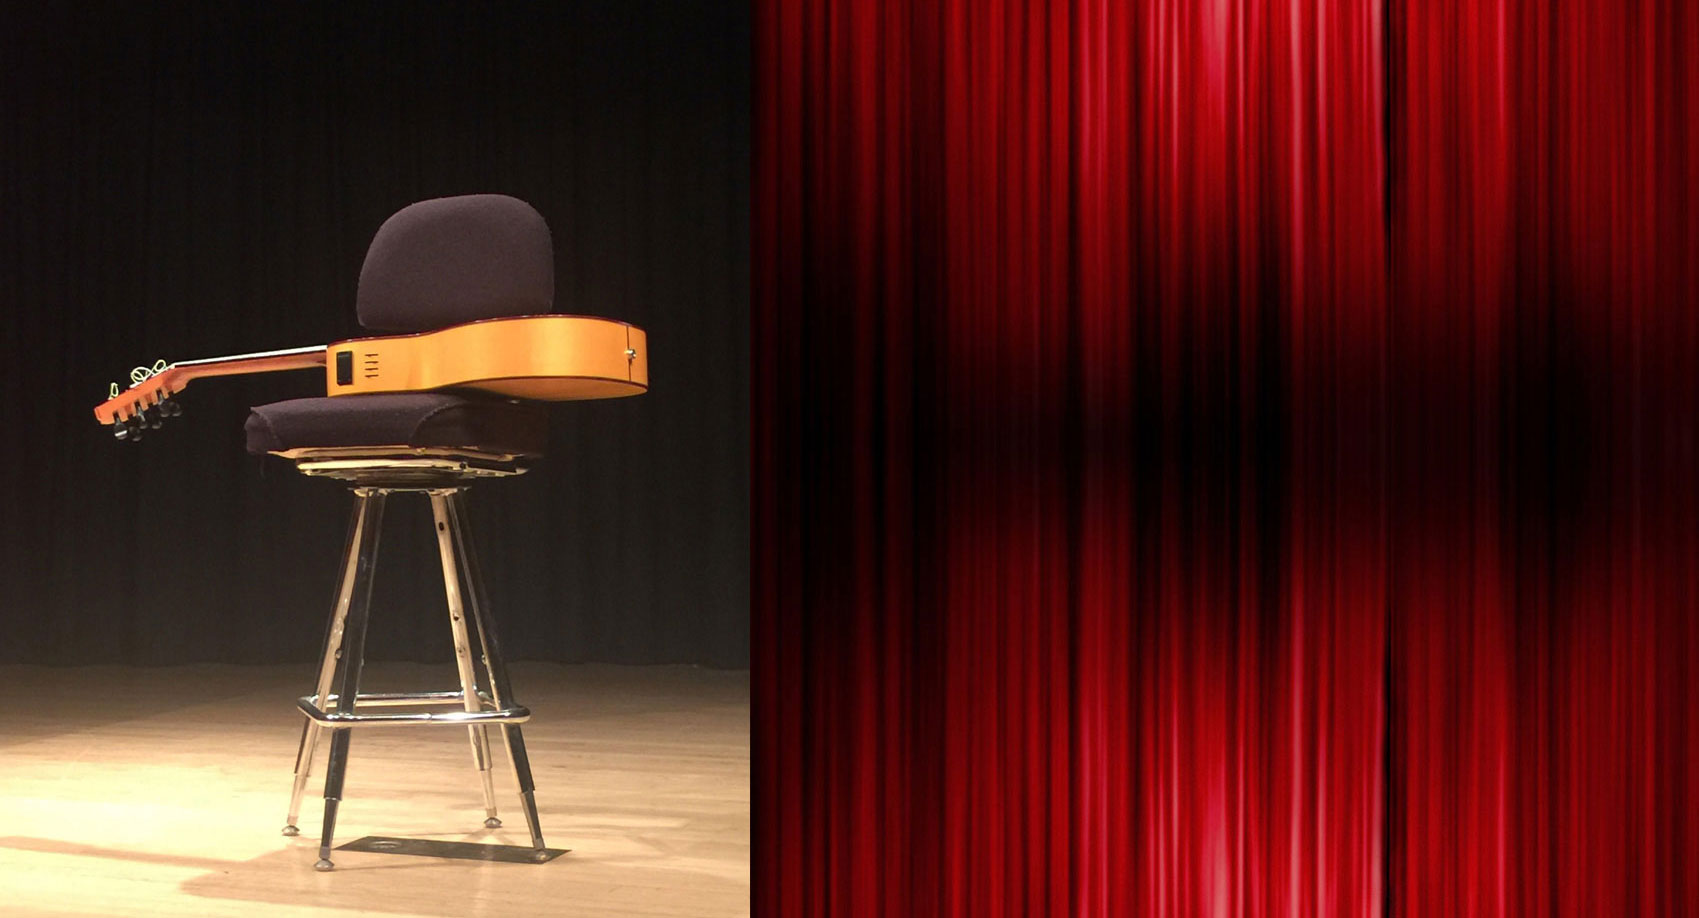 image-of-guitar-on-a-stool-and-a-red-stage-drape